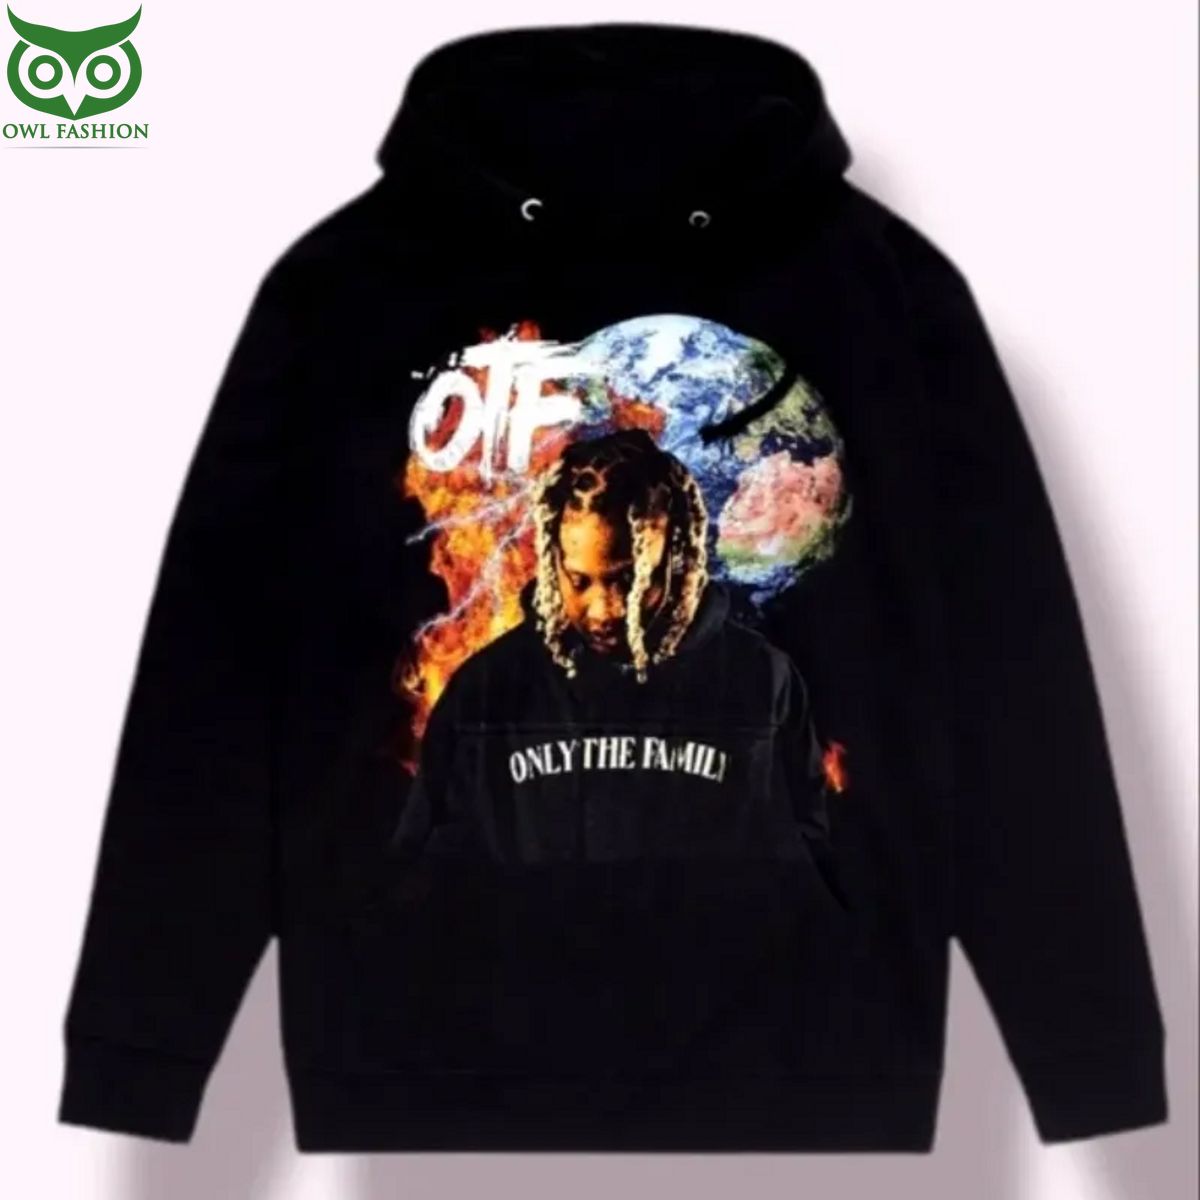 Otf Lil Durk only family Hoodies